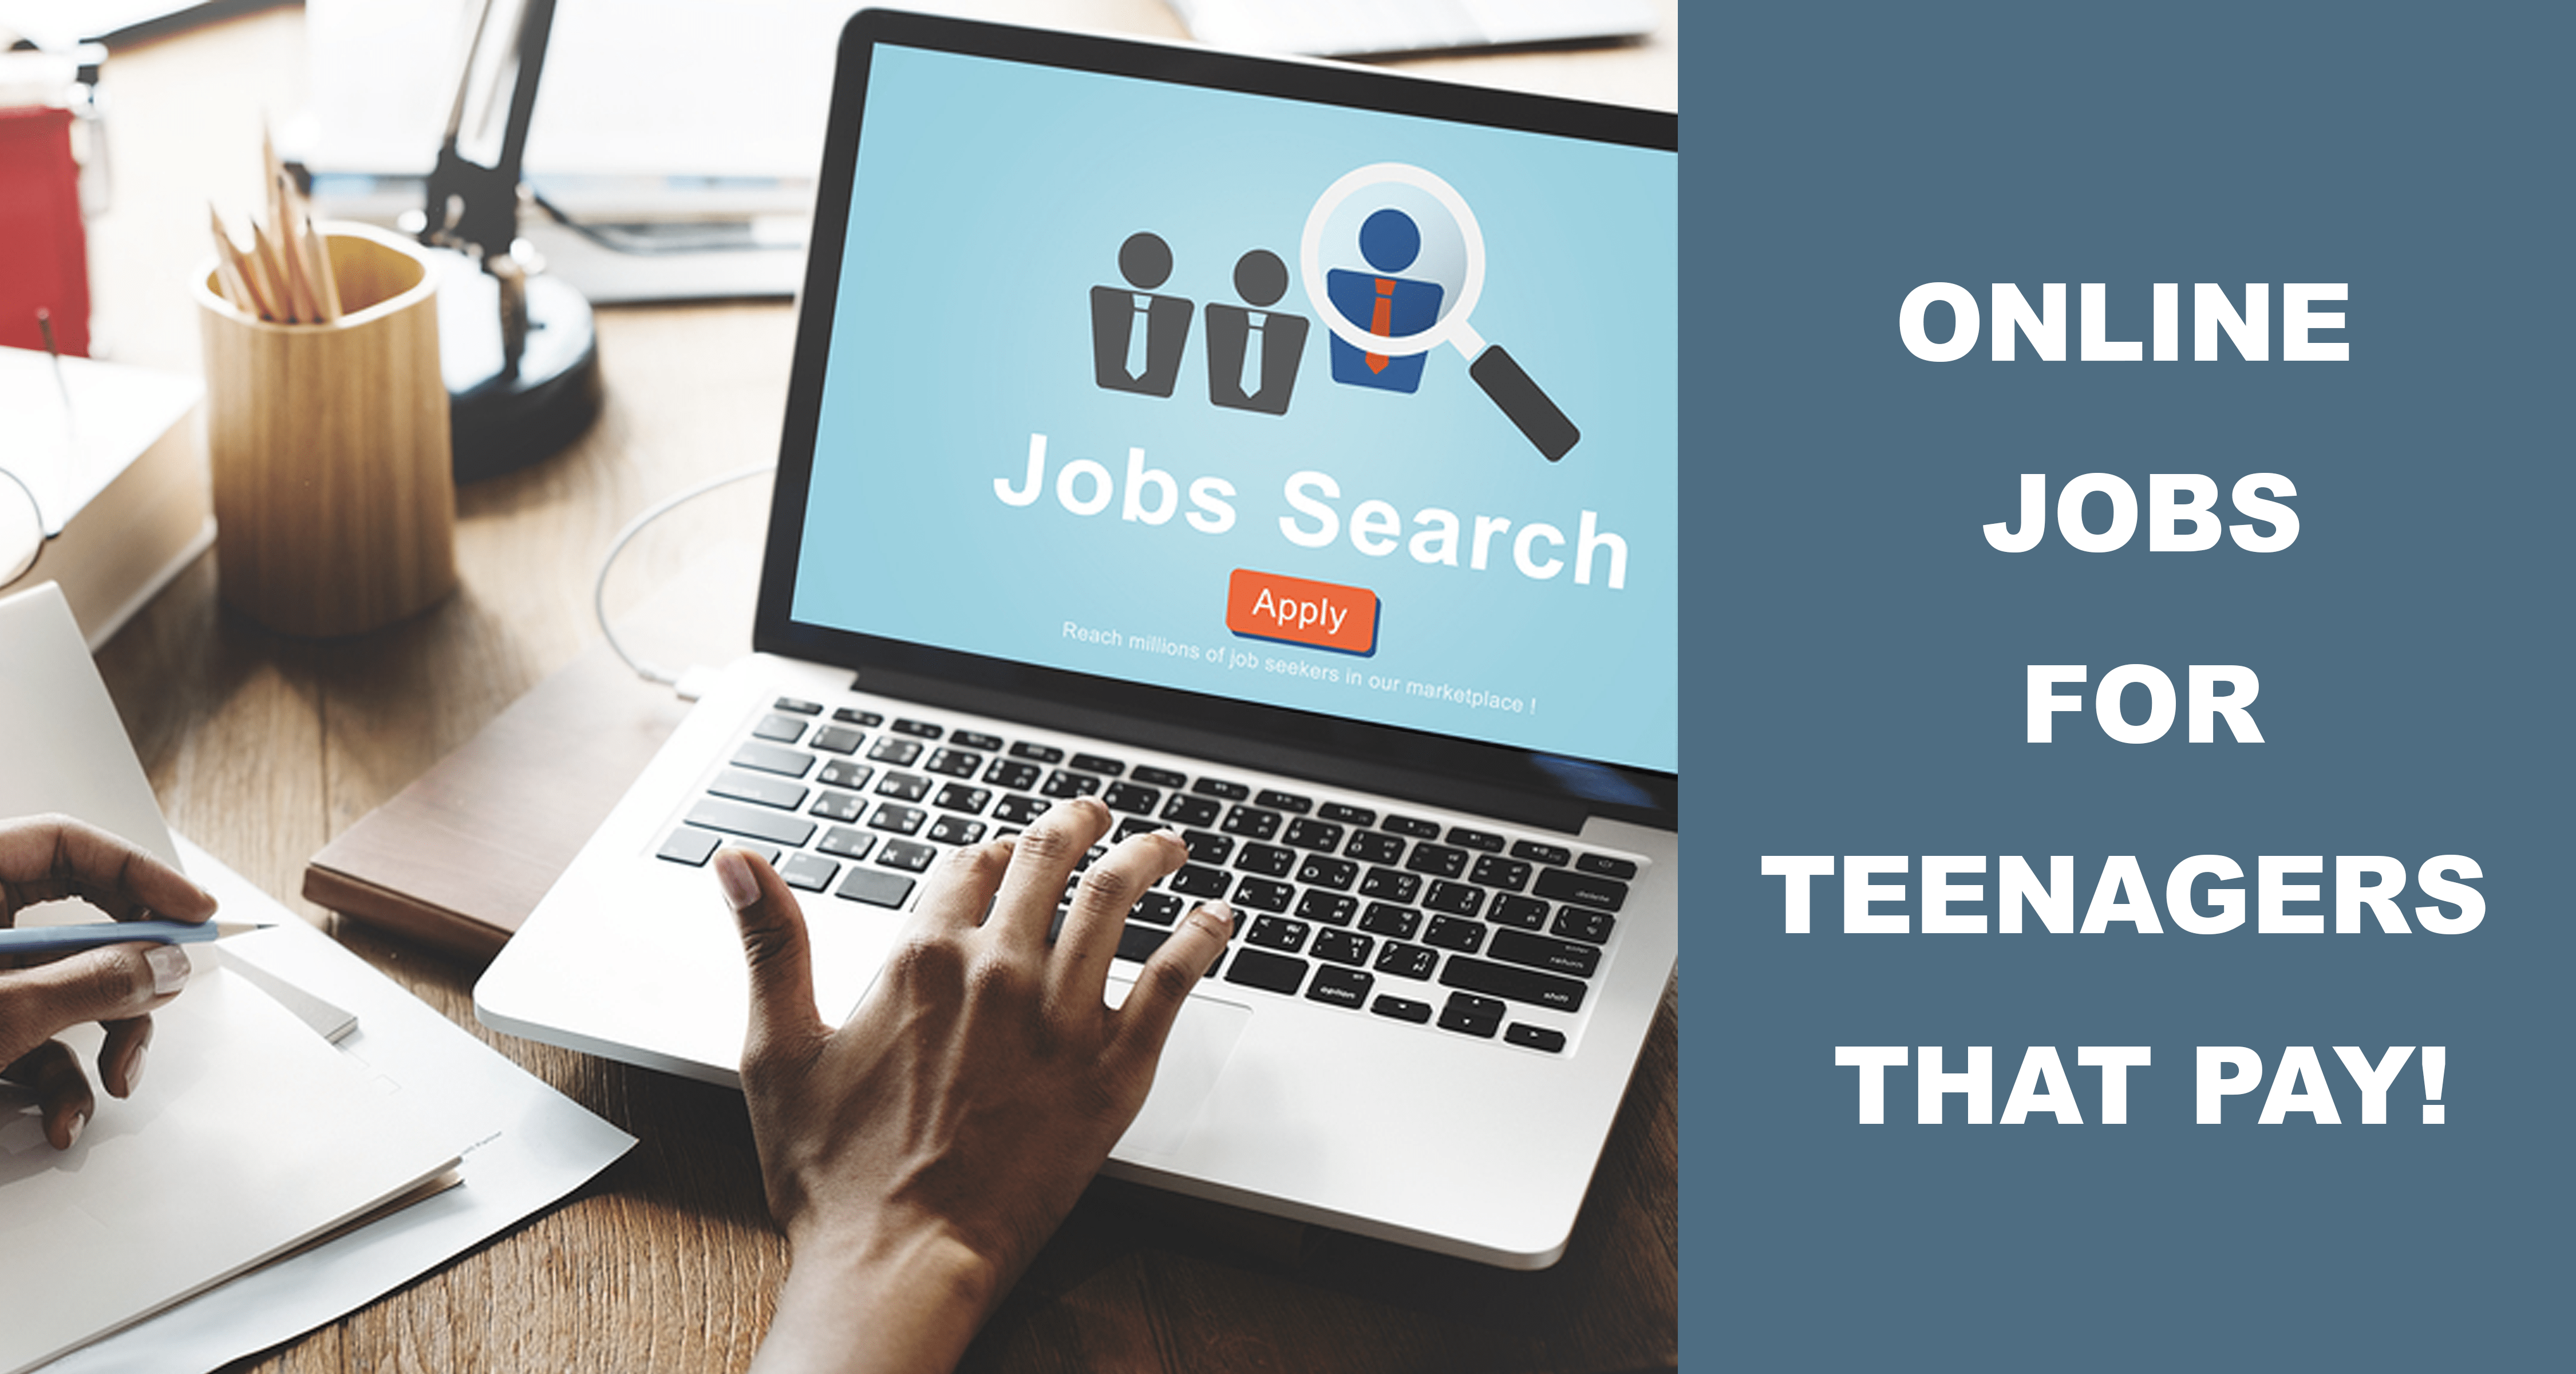 Online Jobs For Teenagers That Pay_